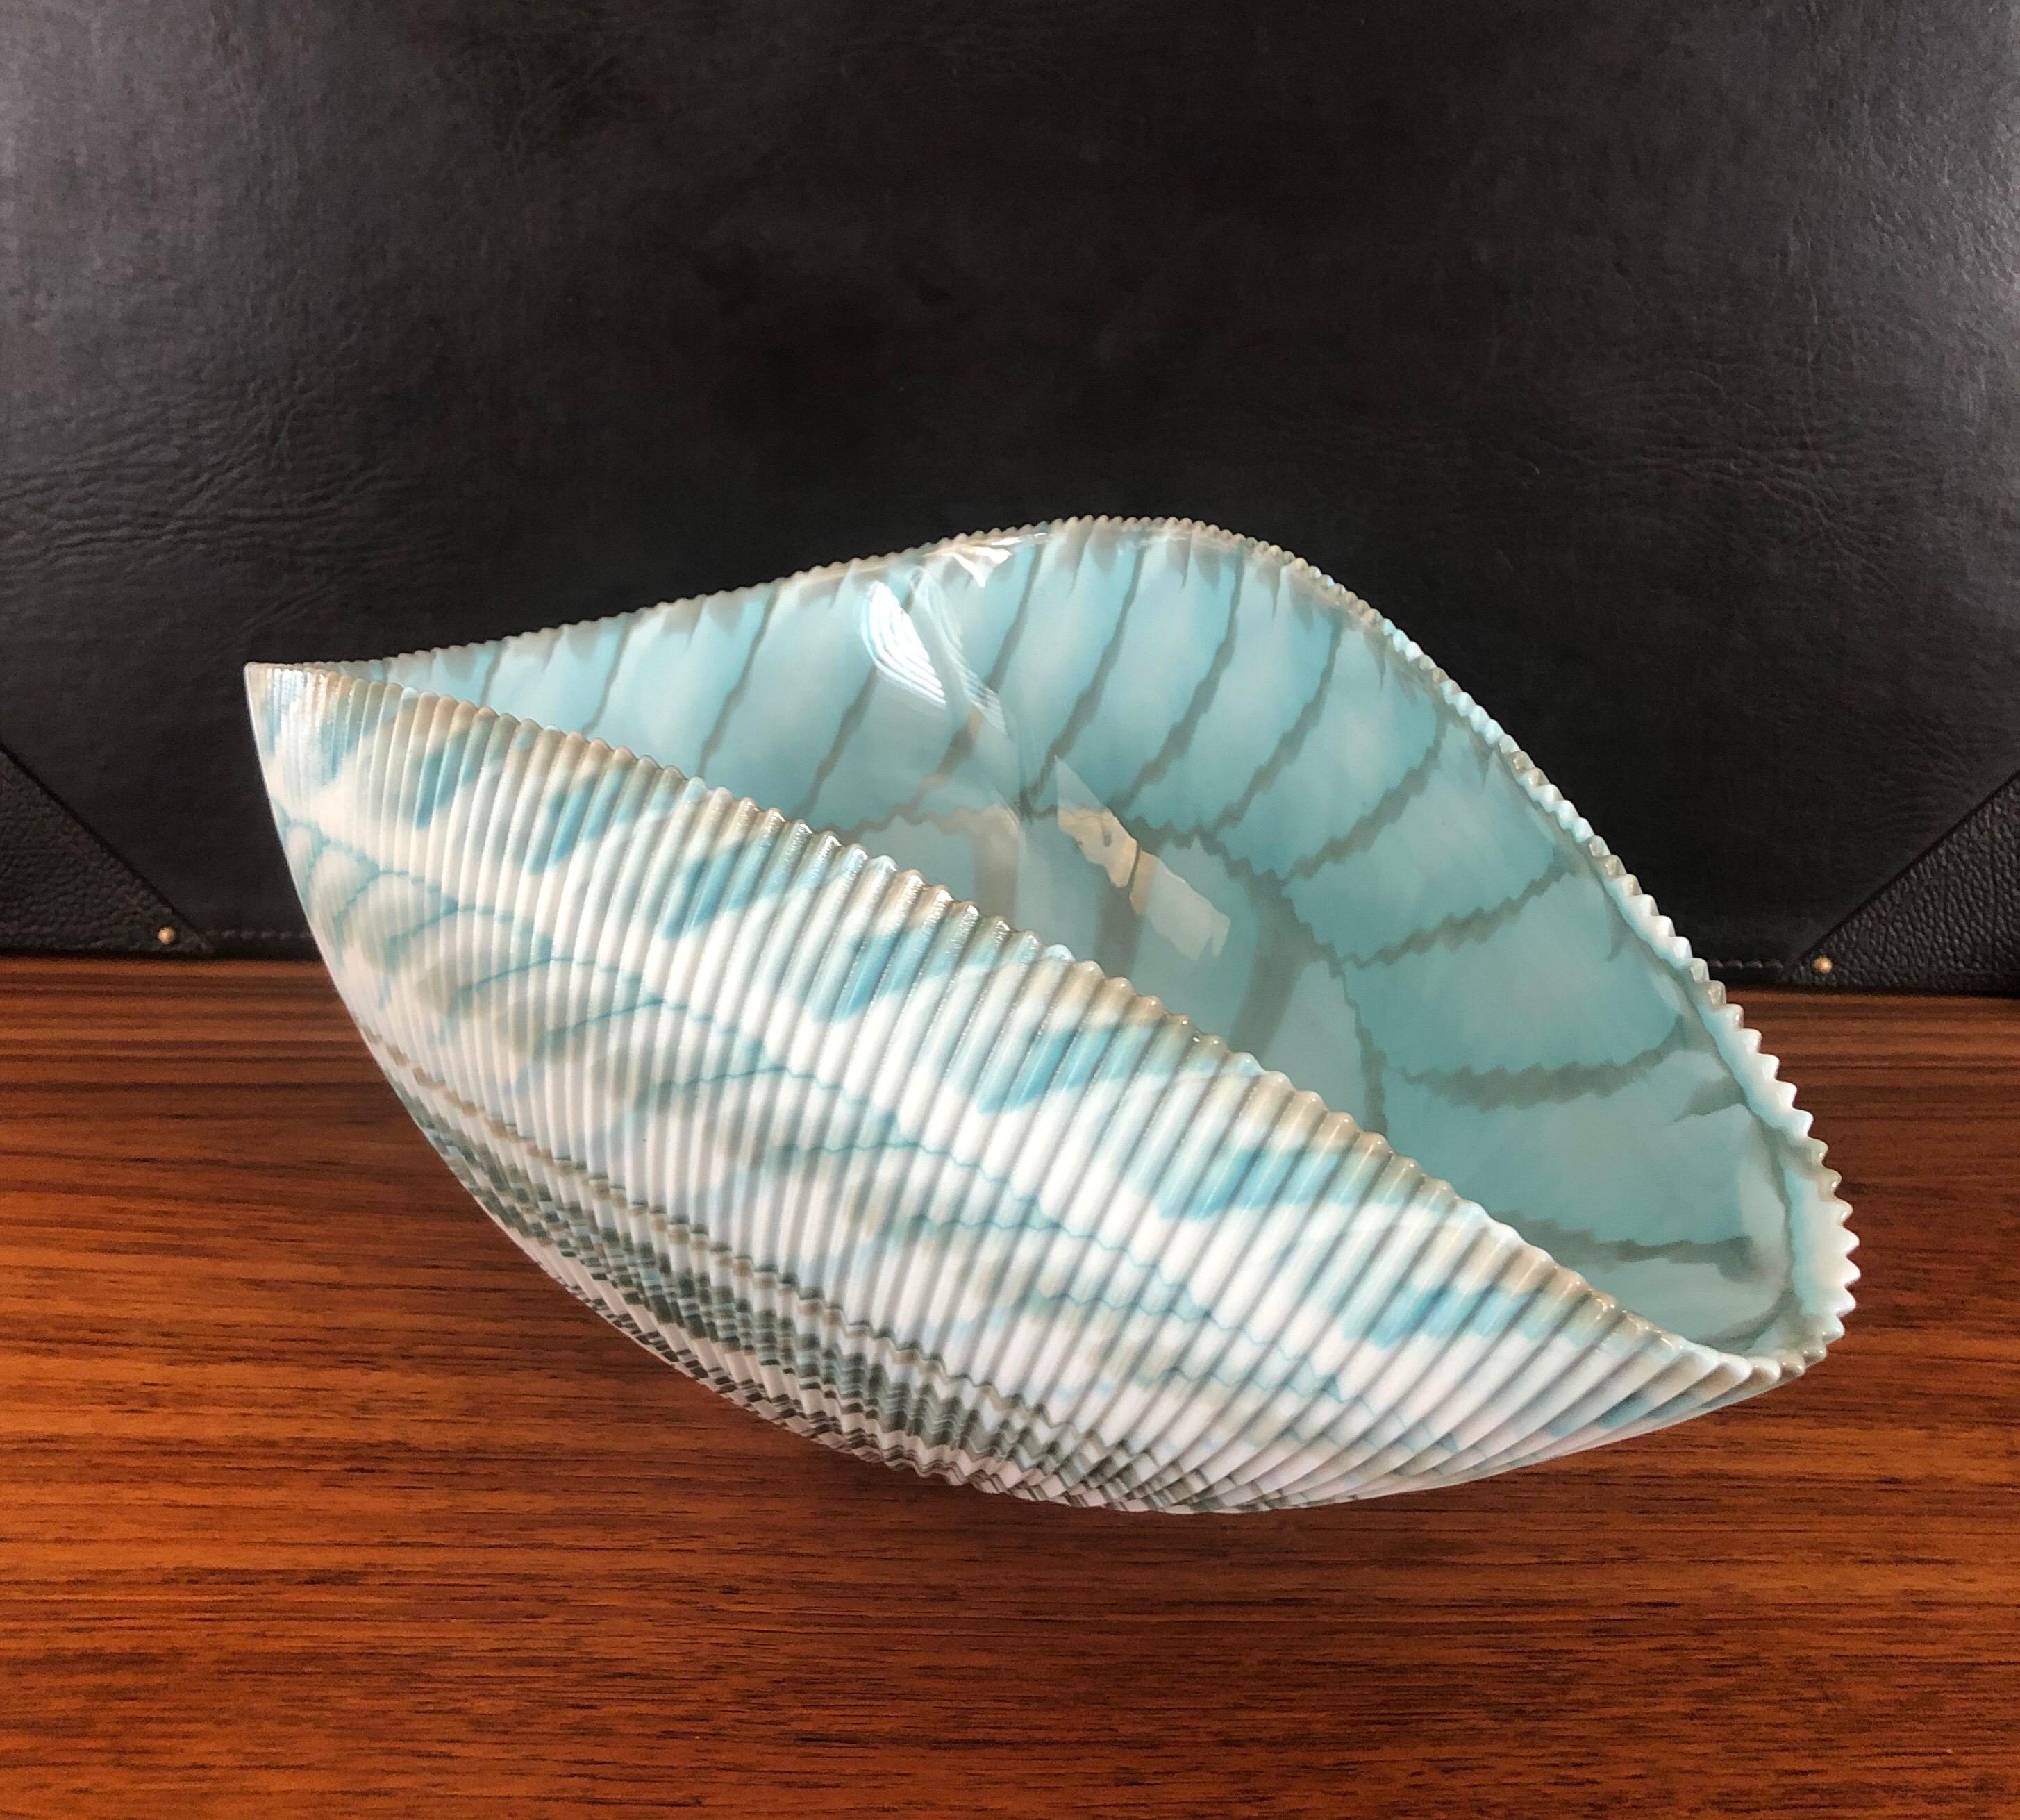 Large Seashell Shaped Centerpiece Bowl By Yalos For Murano Glass At 1stdibs Large Seashell